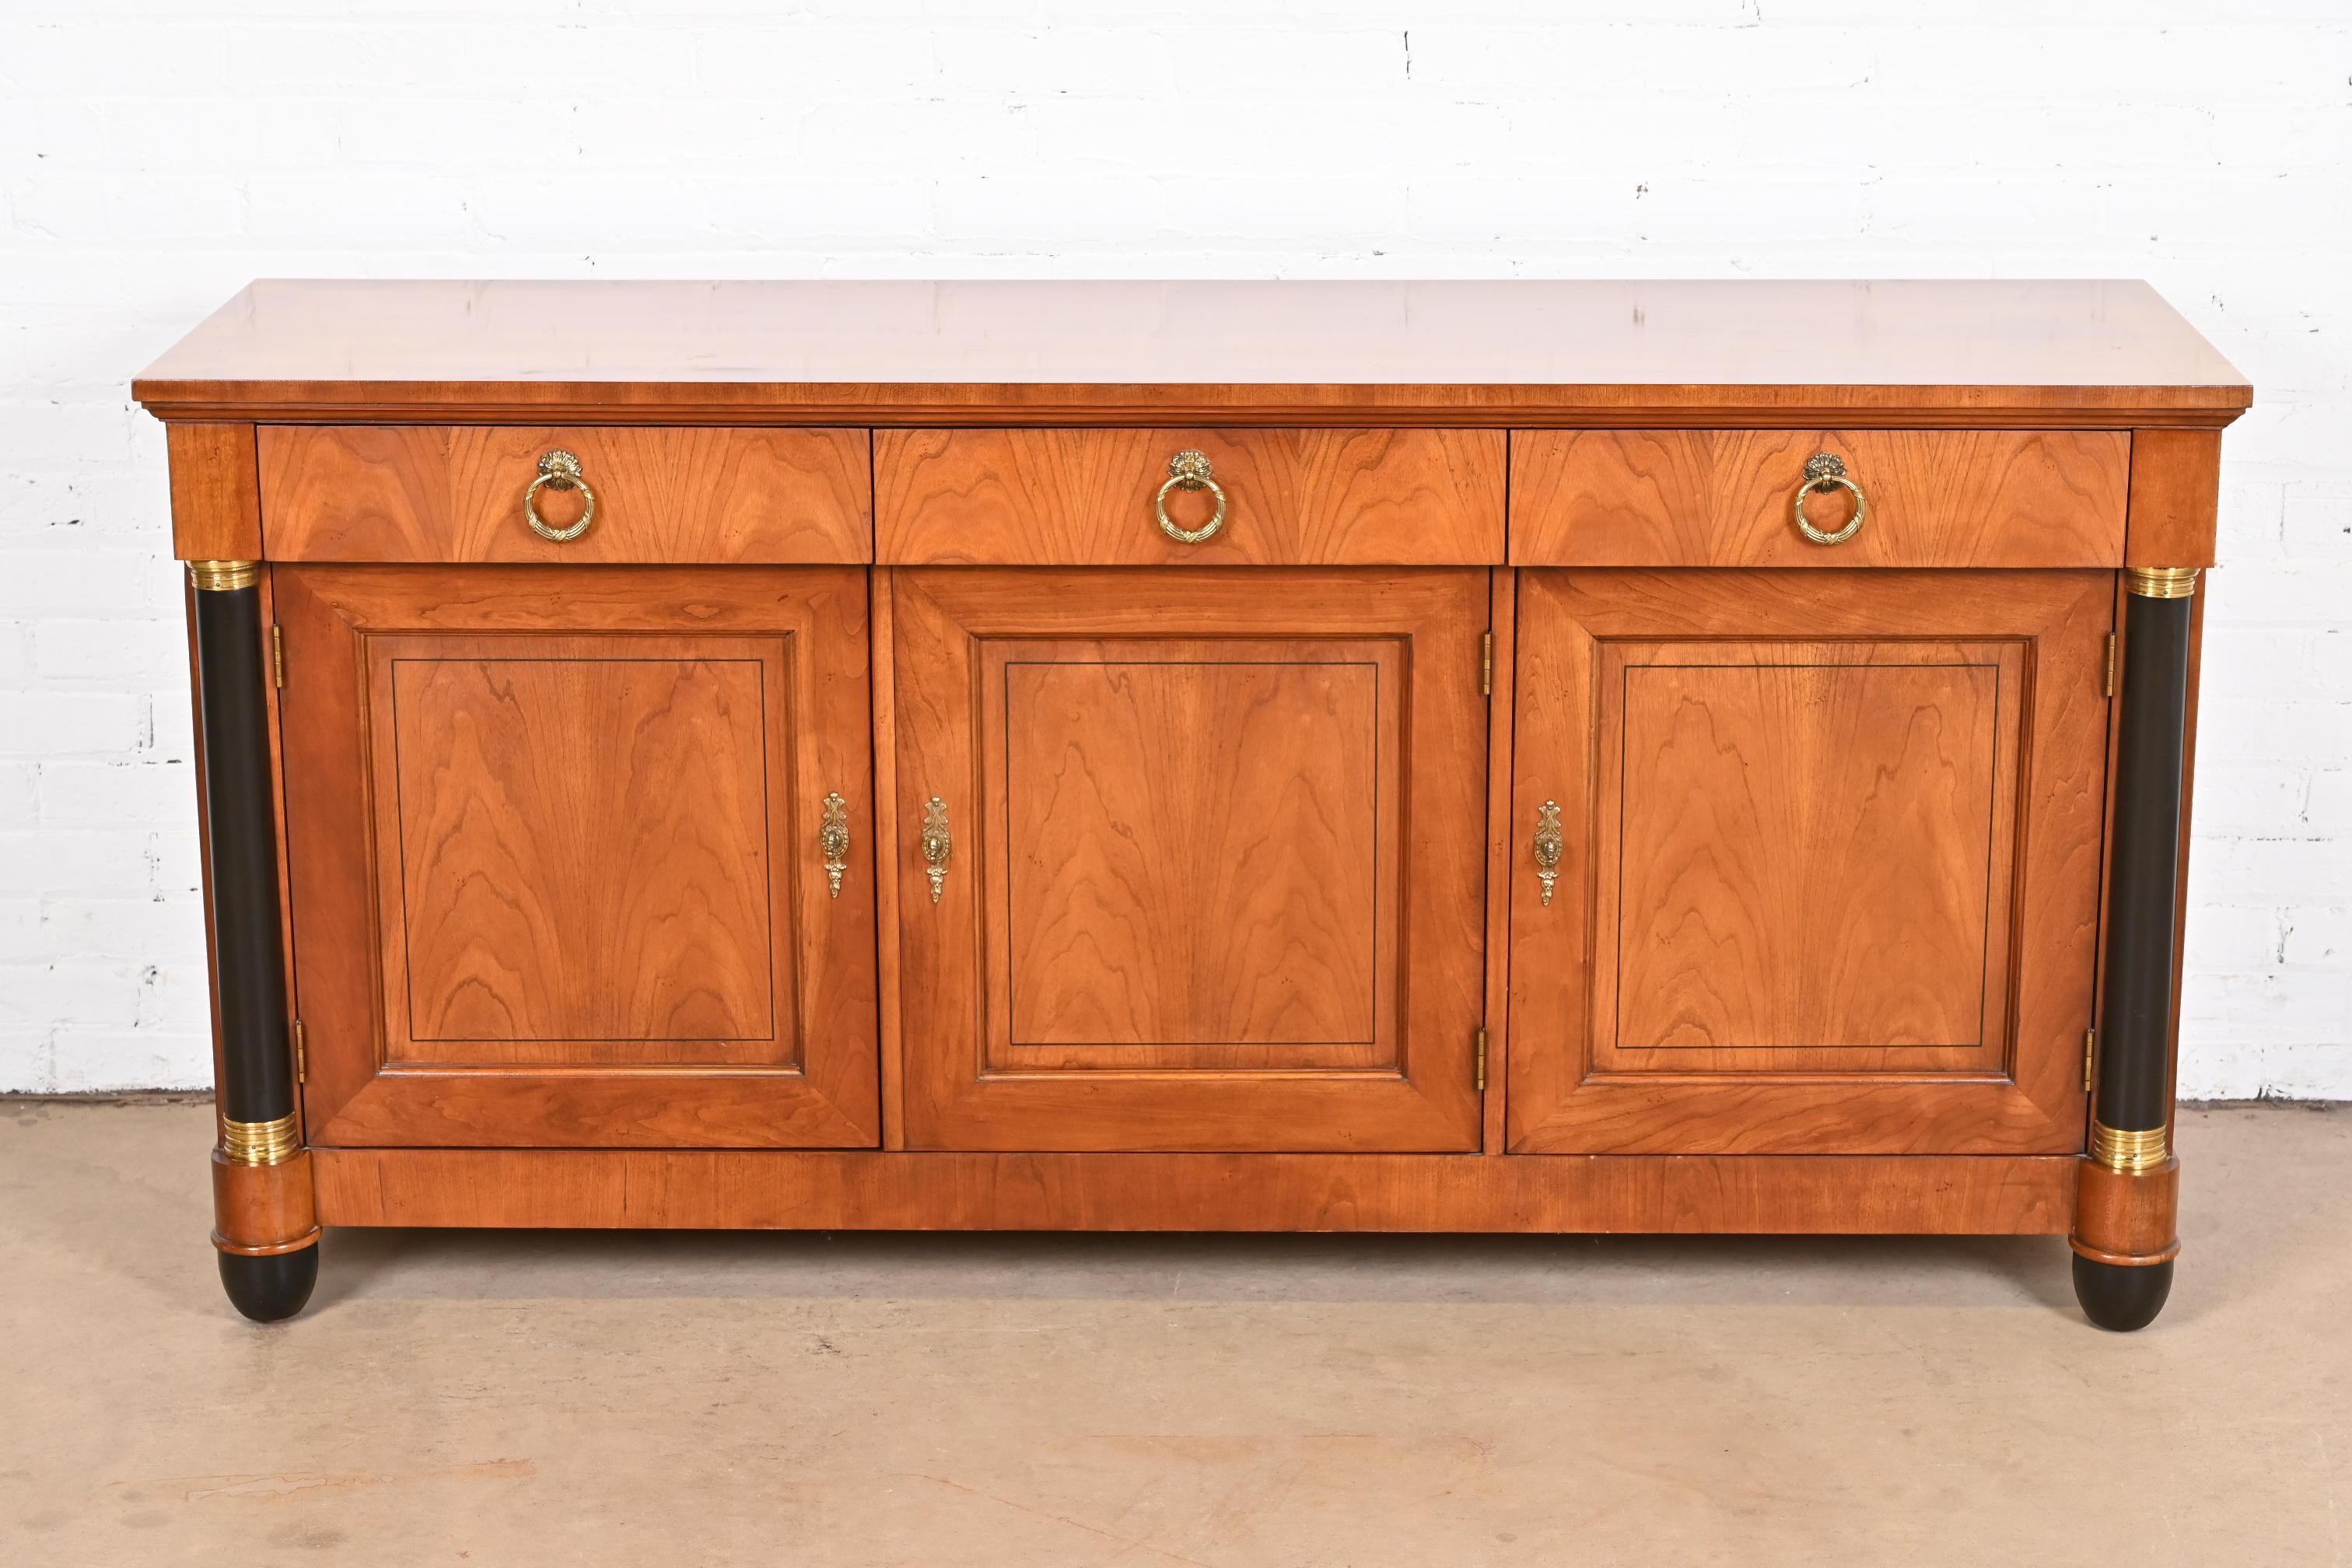 A gorgeous French Empire or Neoclassical style sideboard, credenza, or bar cabinet

By Baker Furniture

USA, circa 1980s

Carved cherry wood, with ebonized columns and feet, and original brass hardware.

Measures: 66